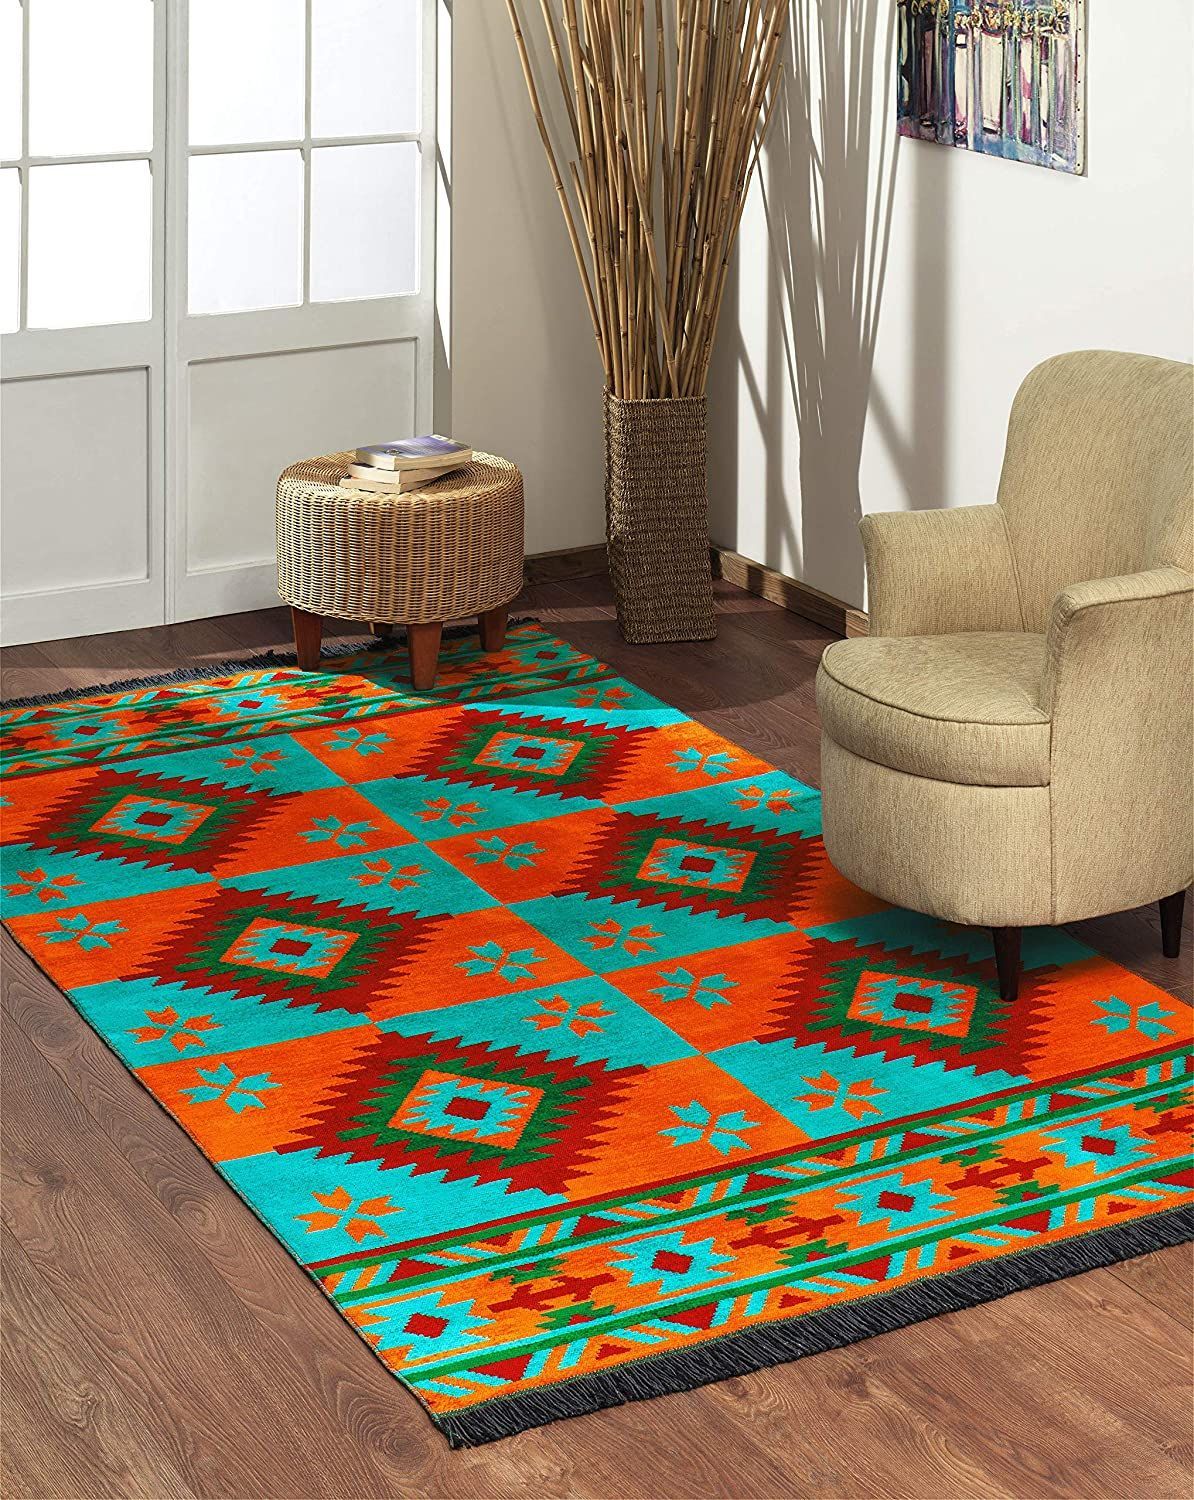 NEW SMALL TO LARGE FADED MULTI COLOUR HIGH QUALITY FUNKY RETRO RUGS Think Rugs 